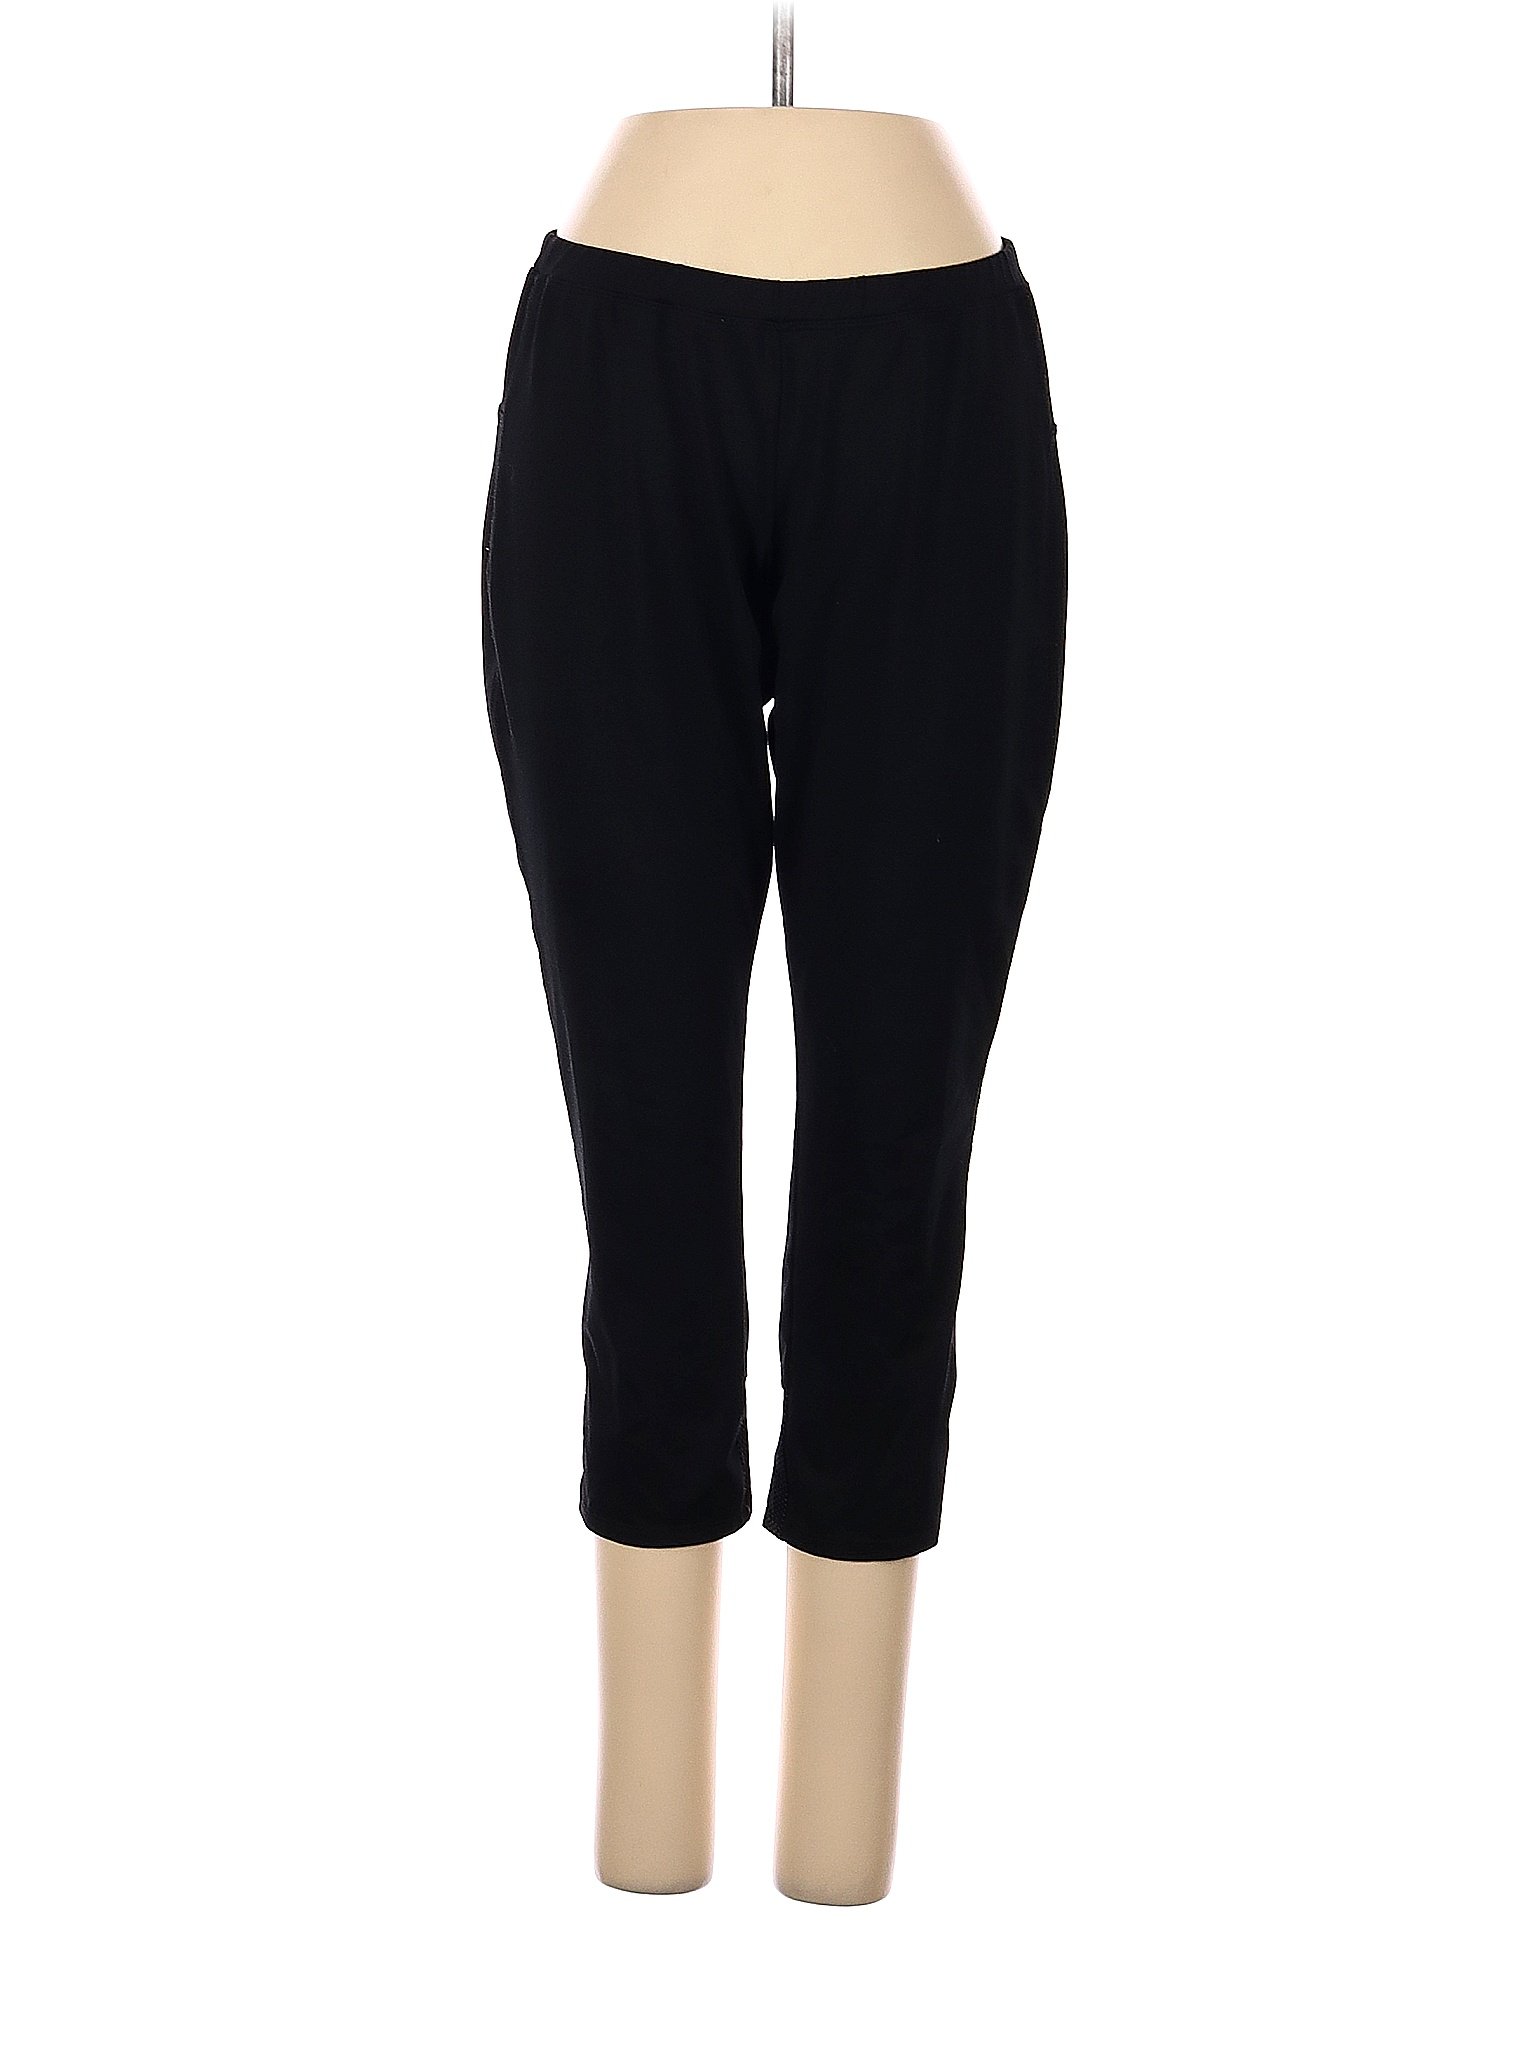 Active by Old Navy Solid Black Active Pants Size S - 84% off | thredUP